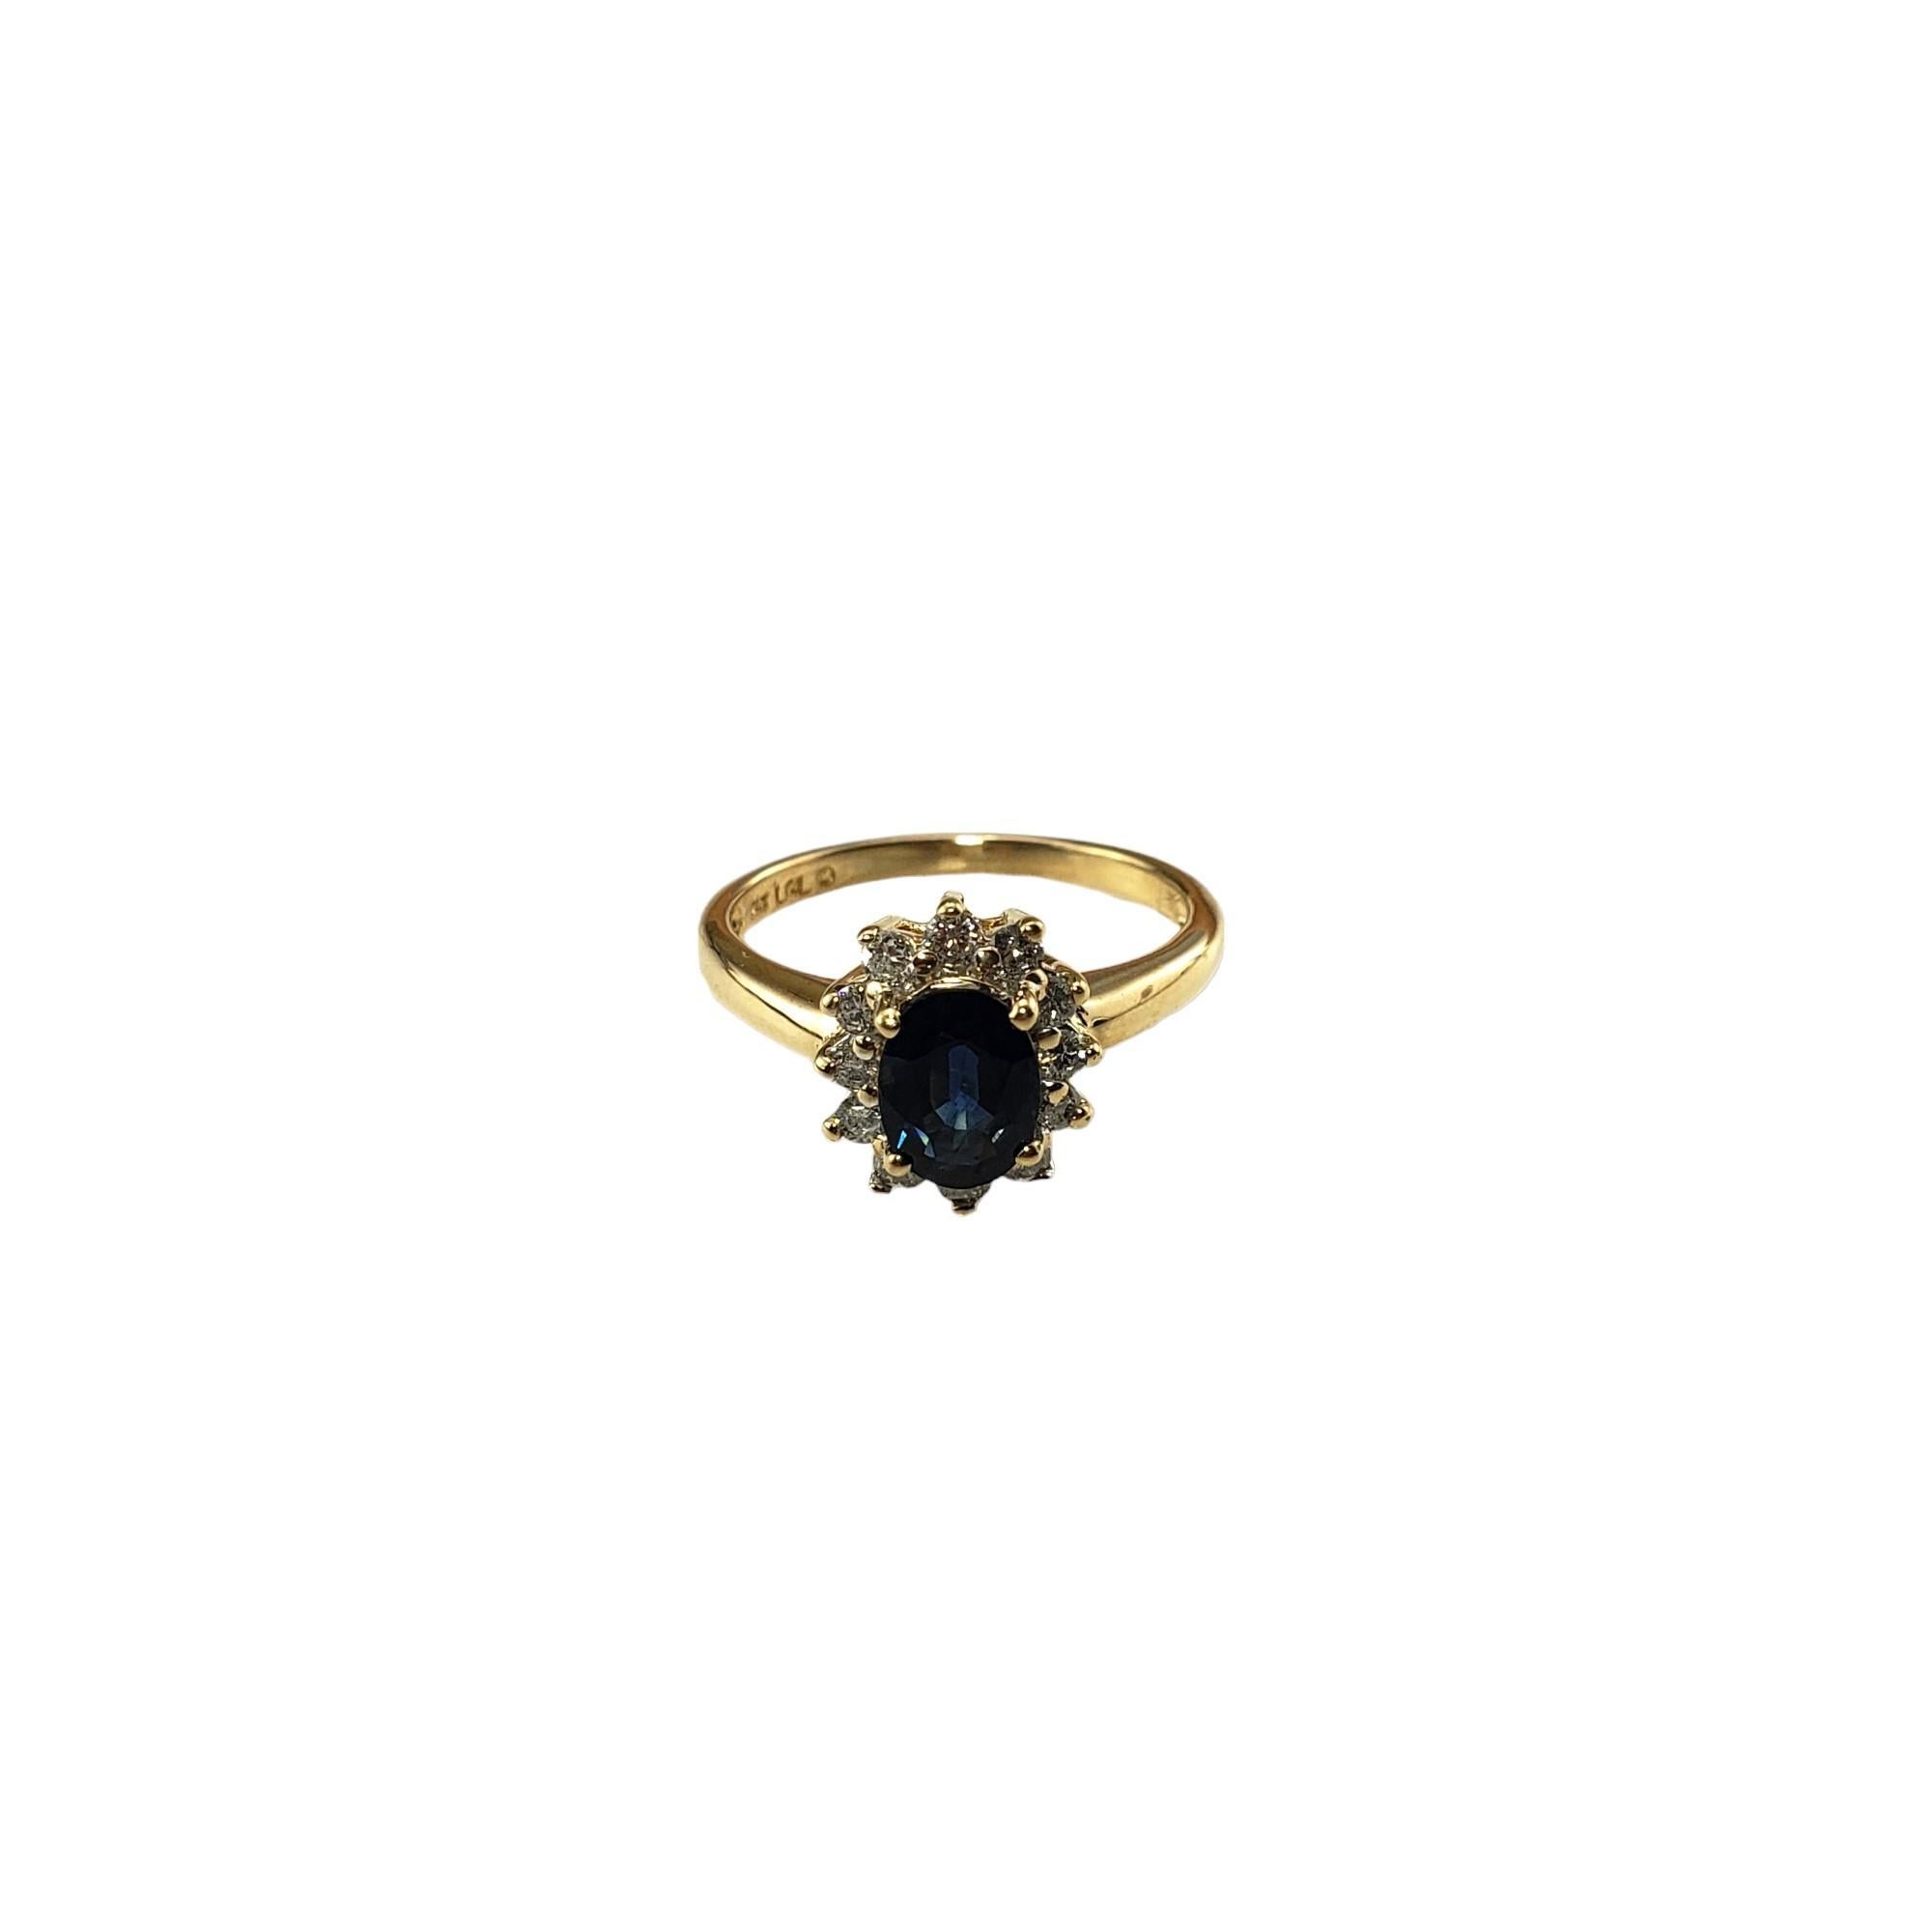 Vintage 14 Karat Yellow Gold Sapphire and Diamond Ring Size 5.25 JAGi Certified-

This elegant ring features one oval blue sapphire surrounded by 12 round brilliant cut diamonds set in classic 14K yellow gold.  Width:  11 mm.  Shank: 2 mm.

Sapphire